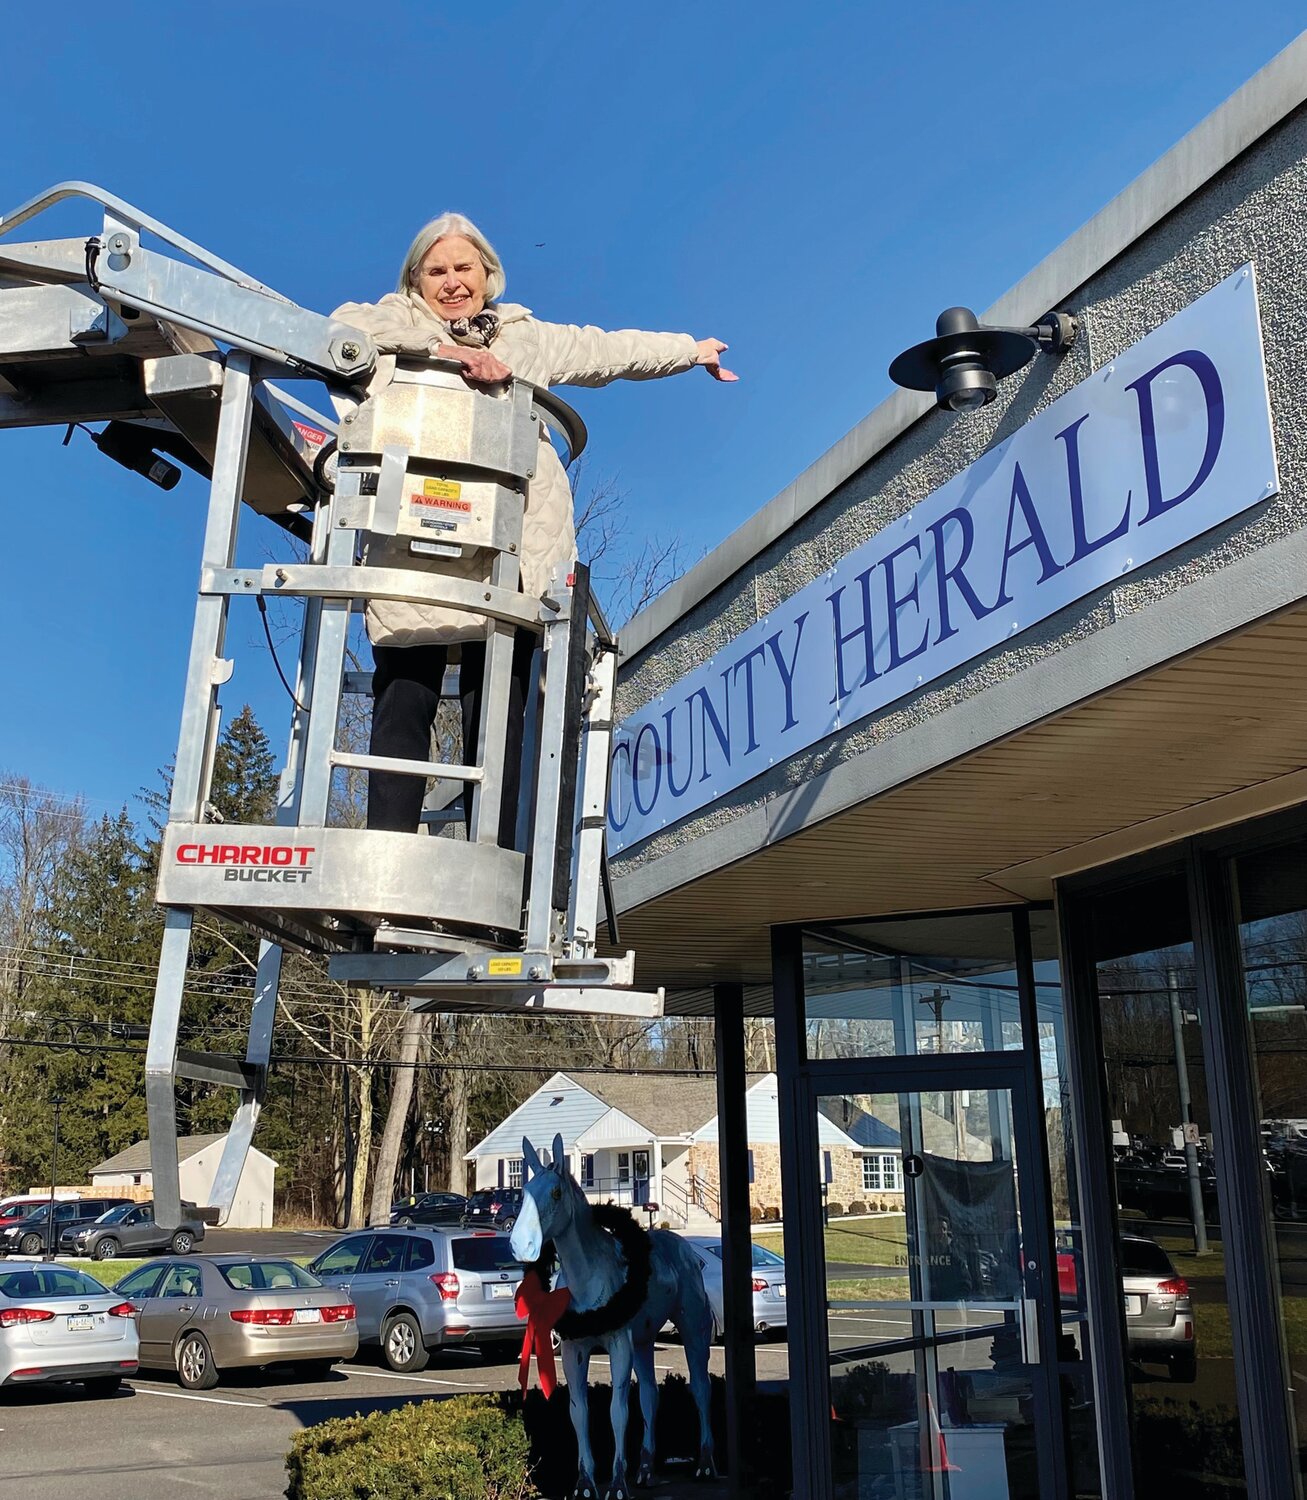 Bucks County Herald founding editor Bridget Wingert got a lift last week so she could show off the sign that now adorns the Herald’s offices at the corner of North Easton and Saw Mill roads in Plumstead Township.